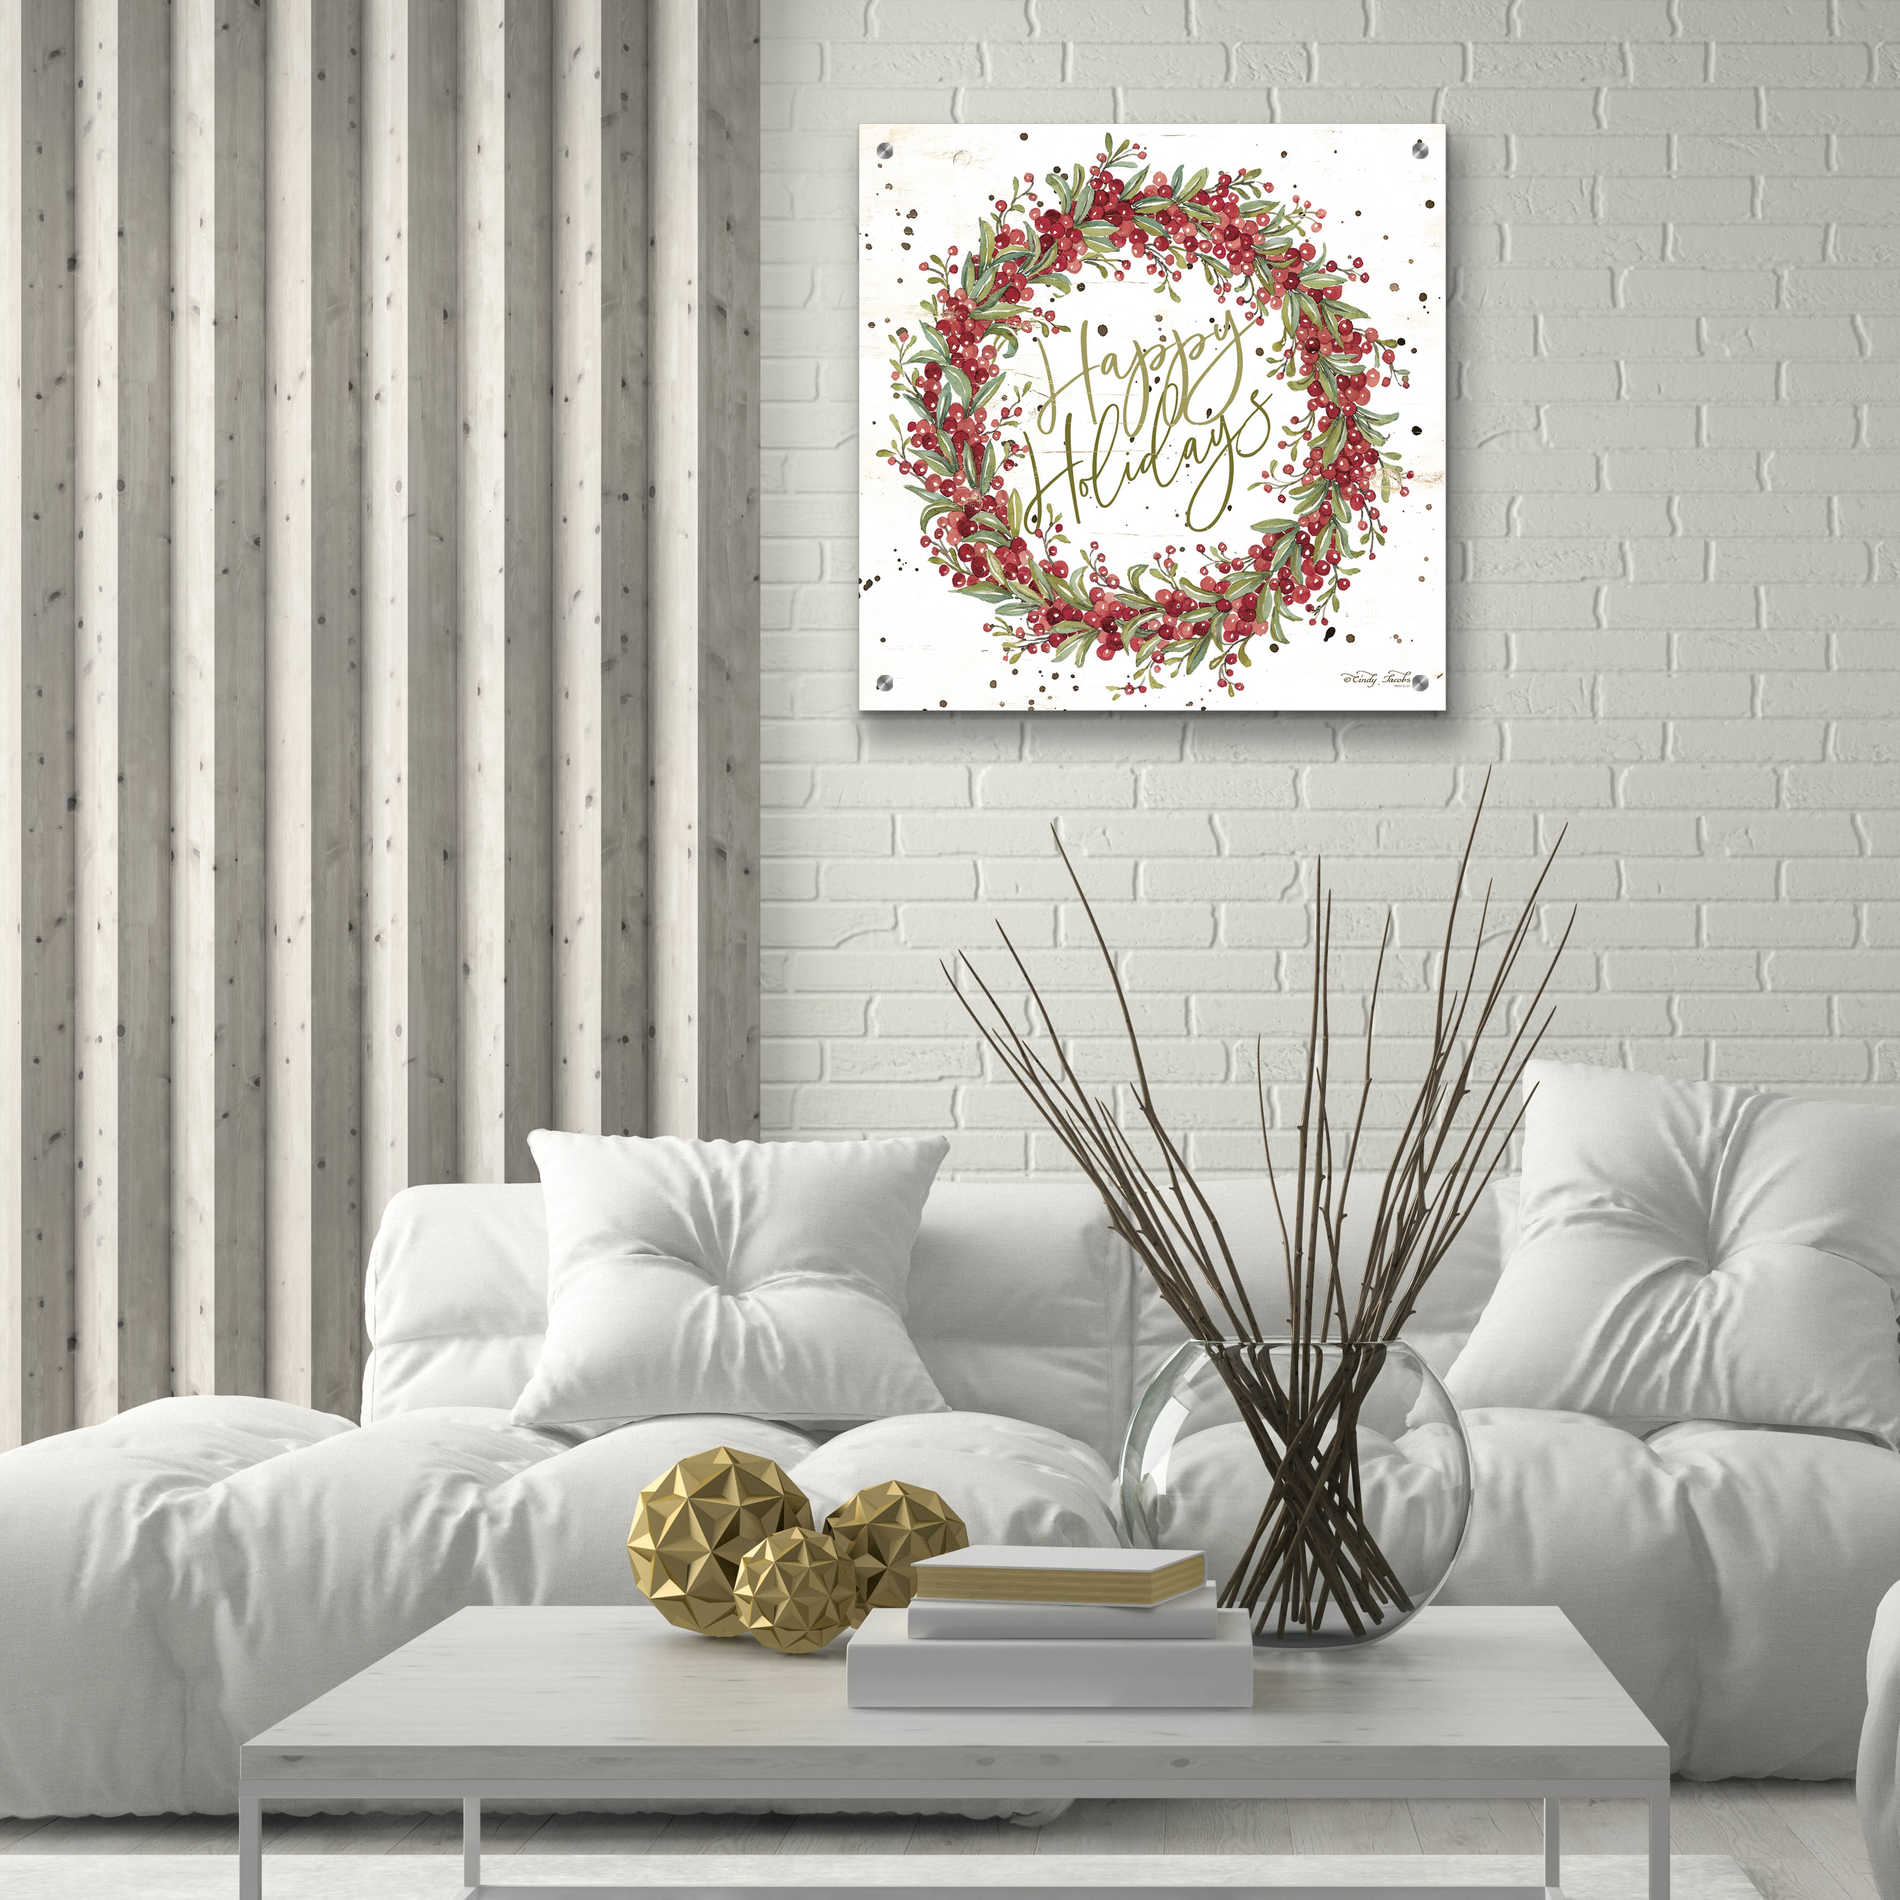 Epic Art 'Happy Holidays Berry Wreath' by Cindy Jacobs, Acrylic Glass Wall Art,24x24